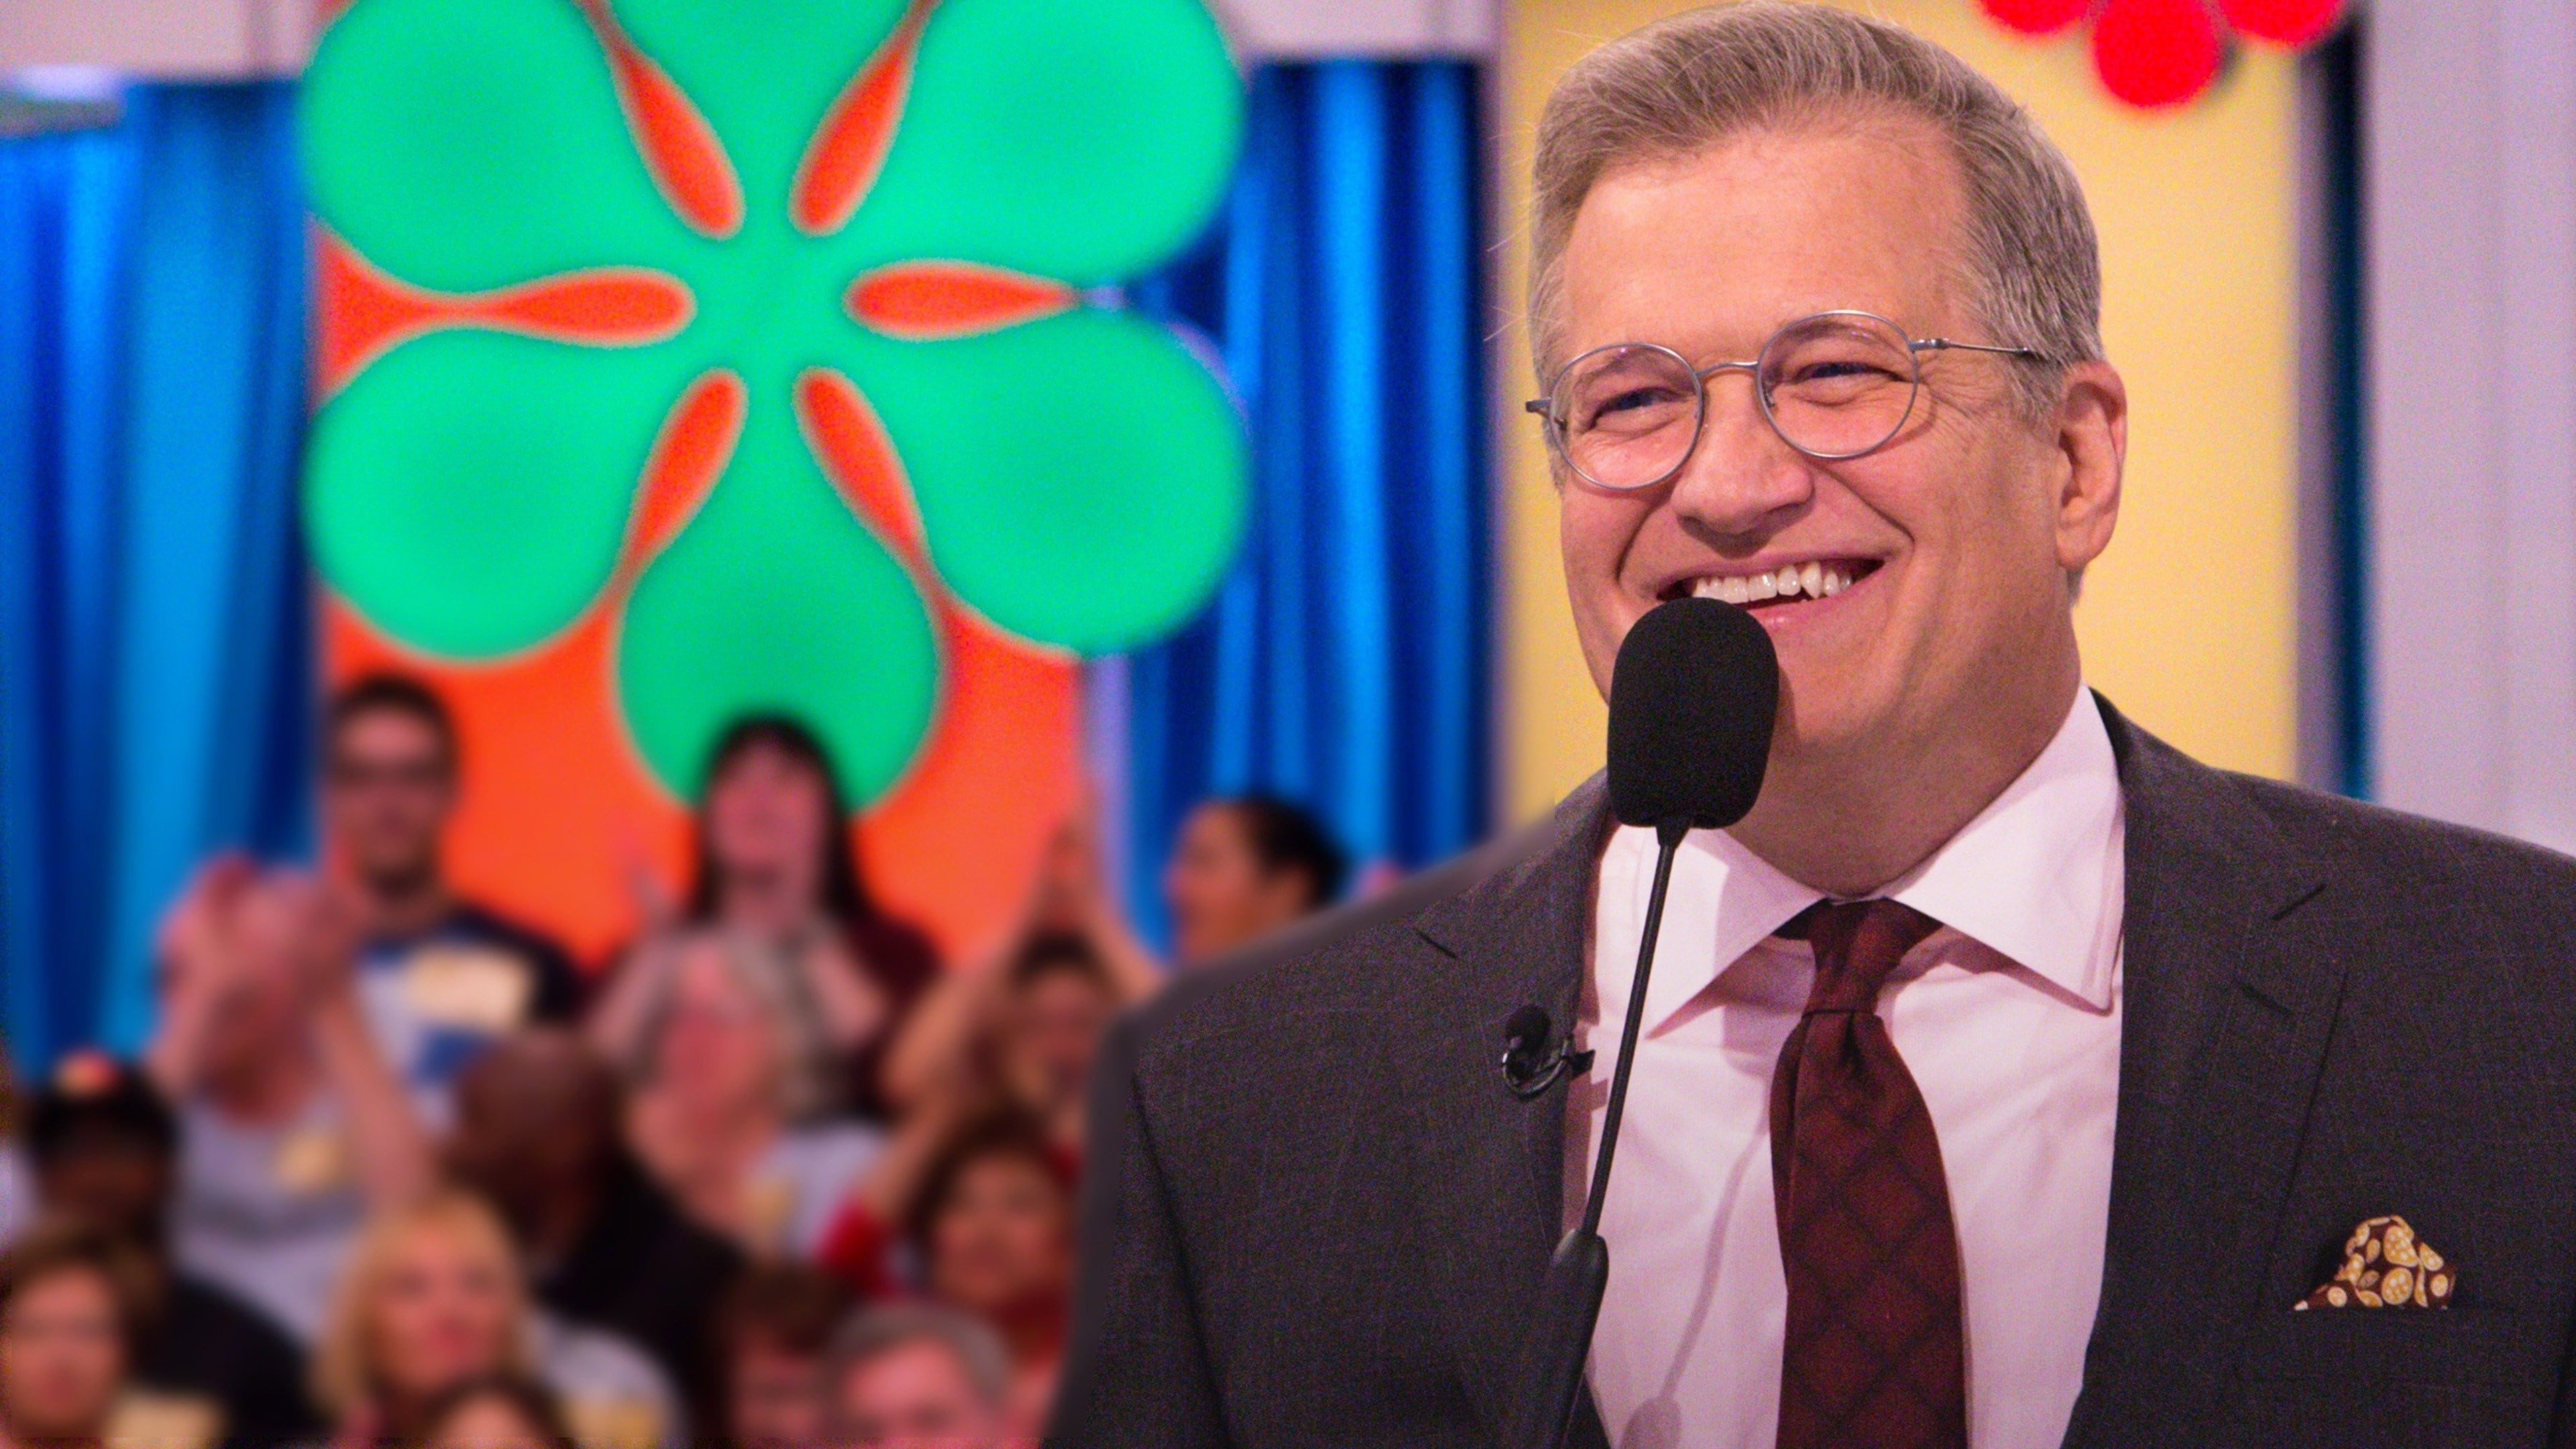 The Price Is Right - Season 3 Episode 97 : The Price Is Right Season 3 Episode 97